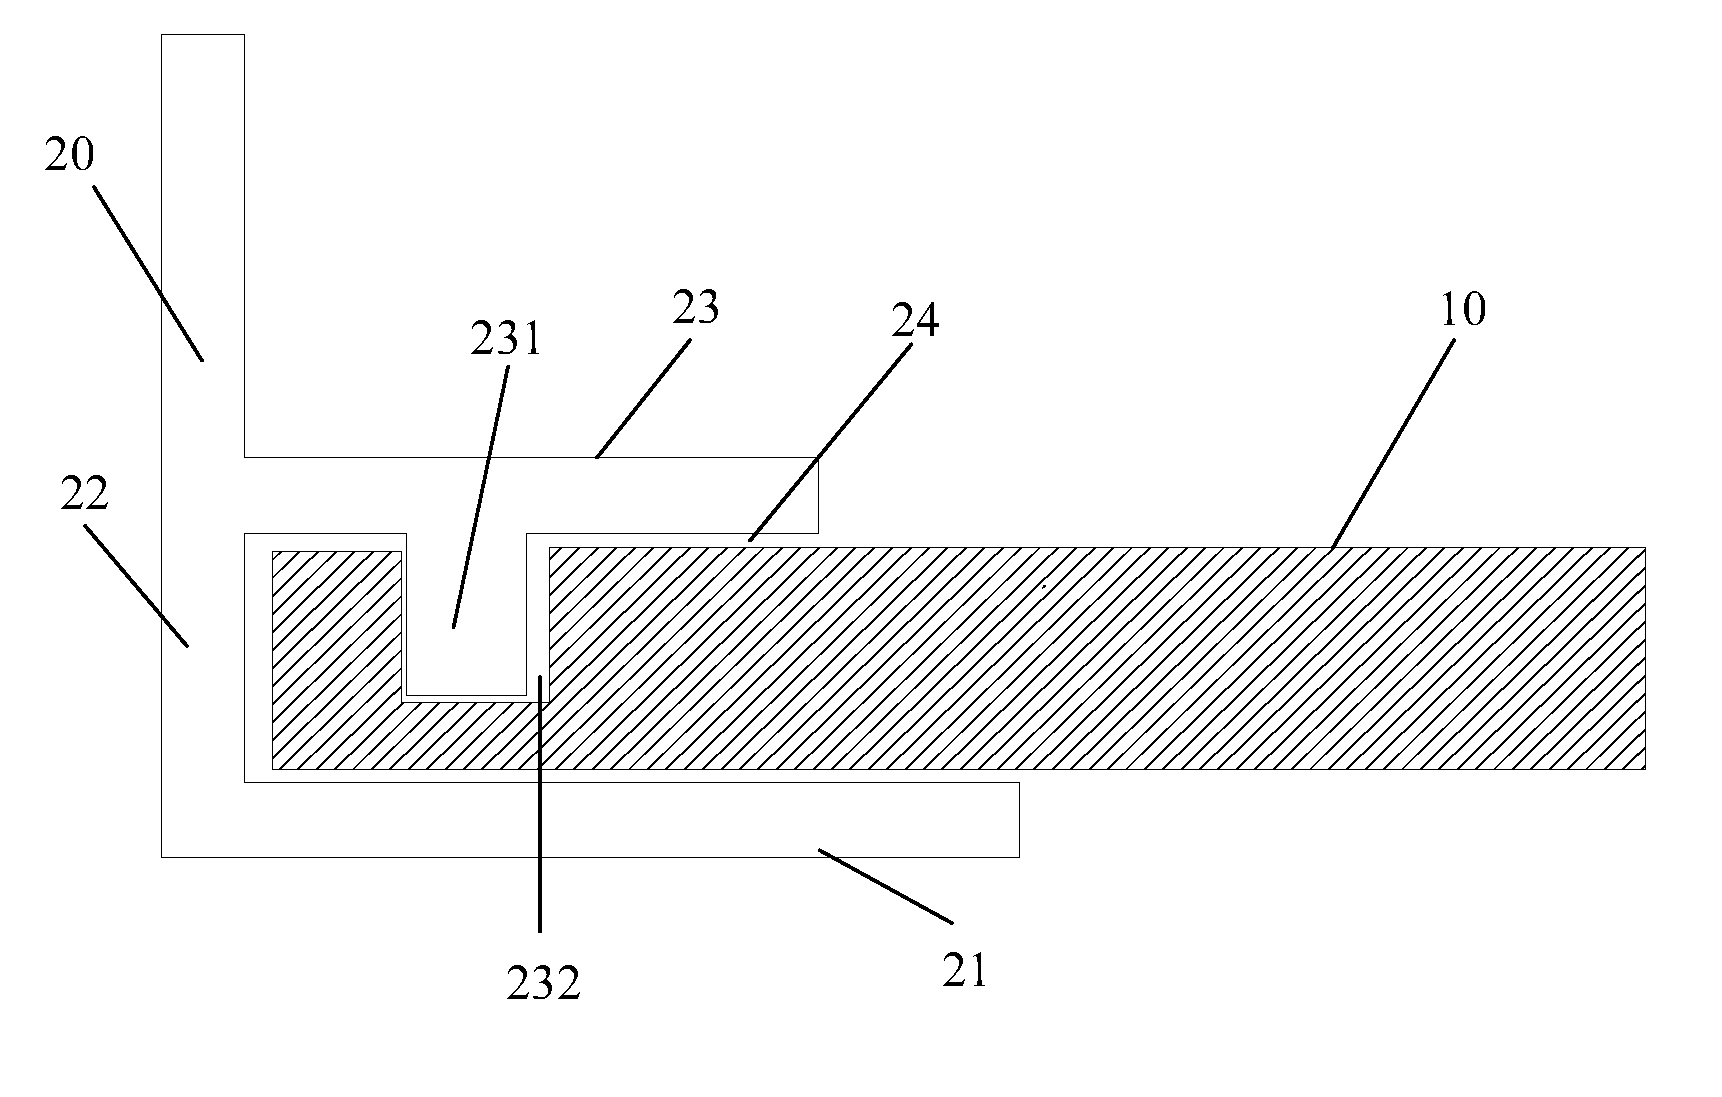 Back plate splicing structure for large-size backlight modules and liquid crystal display